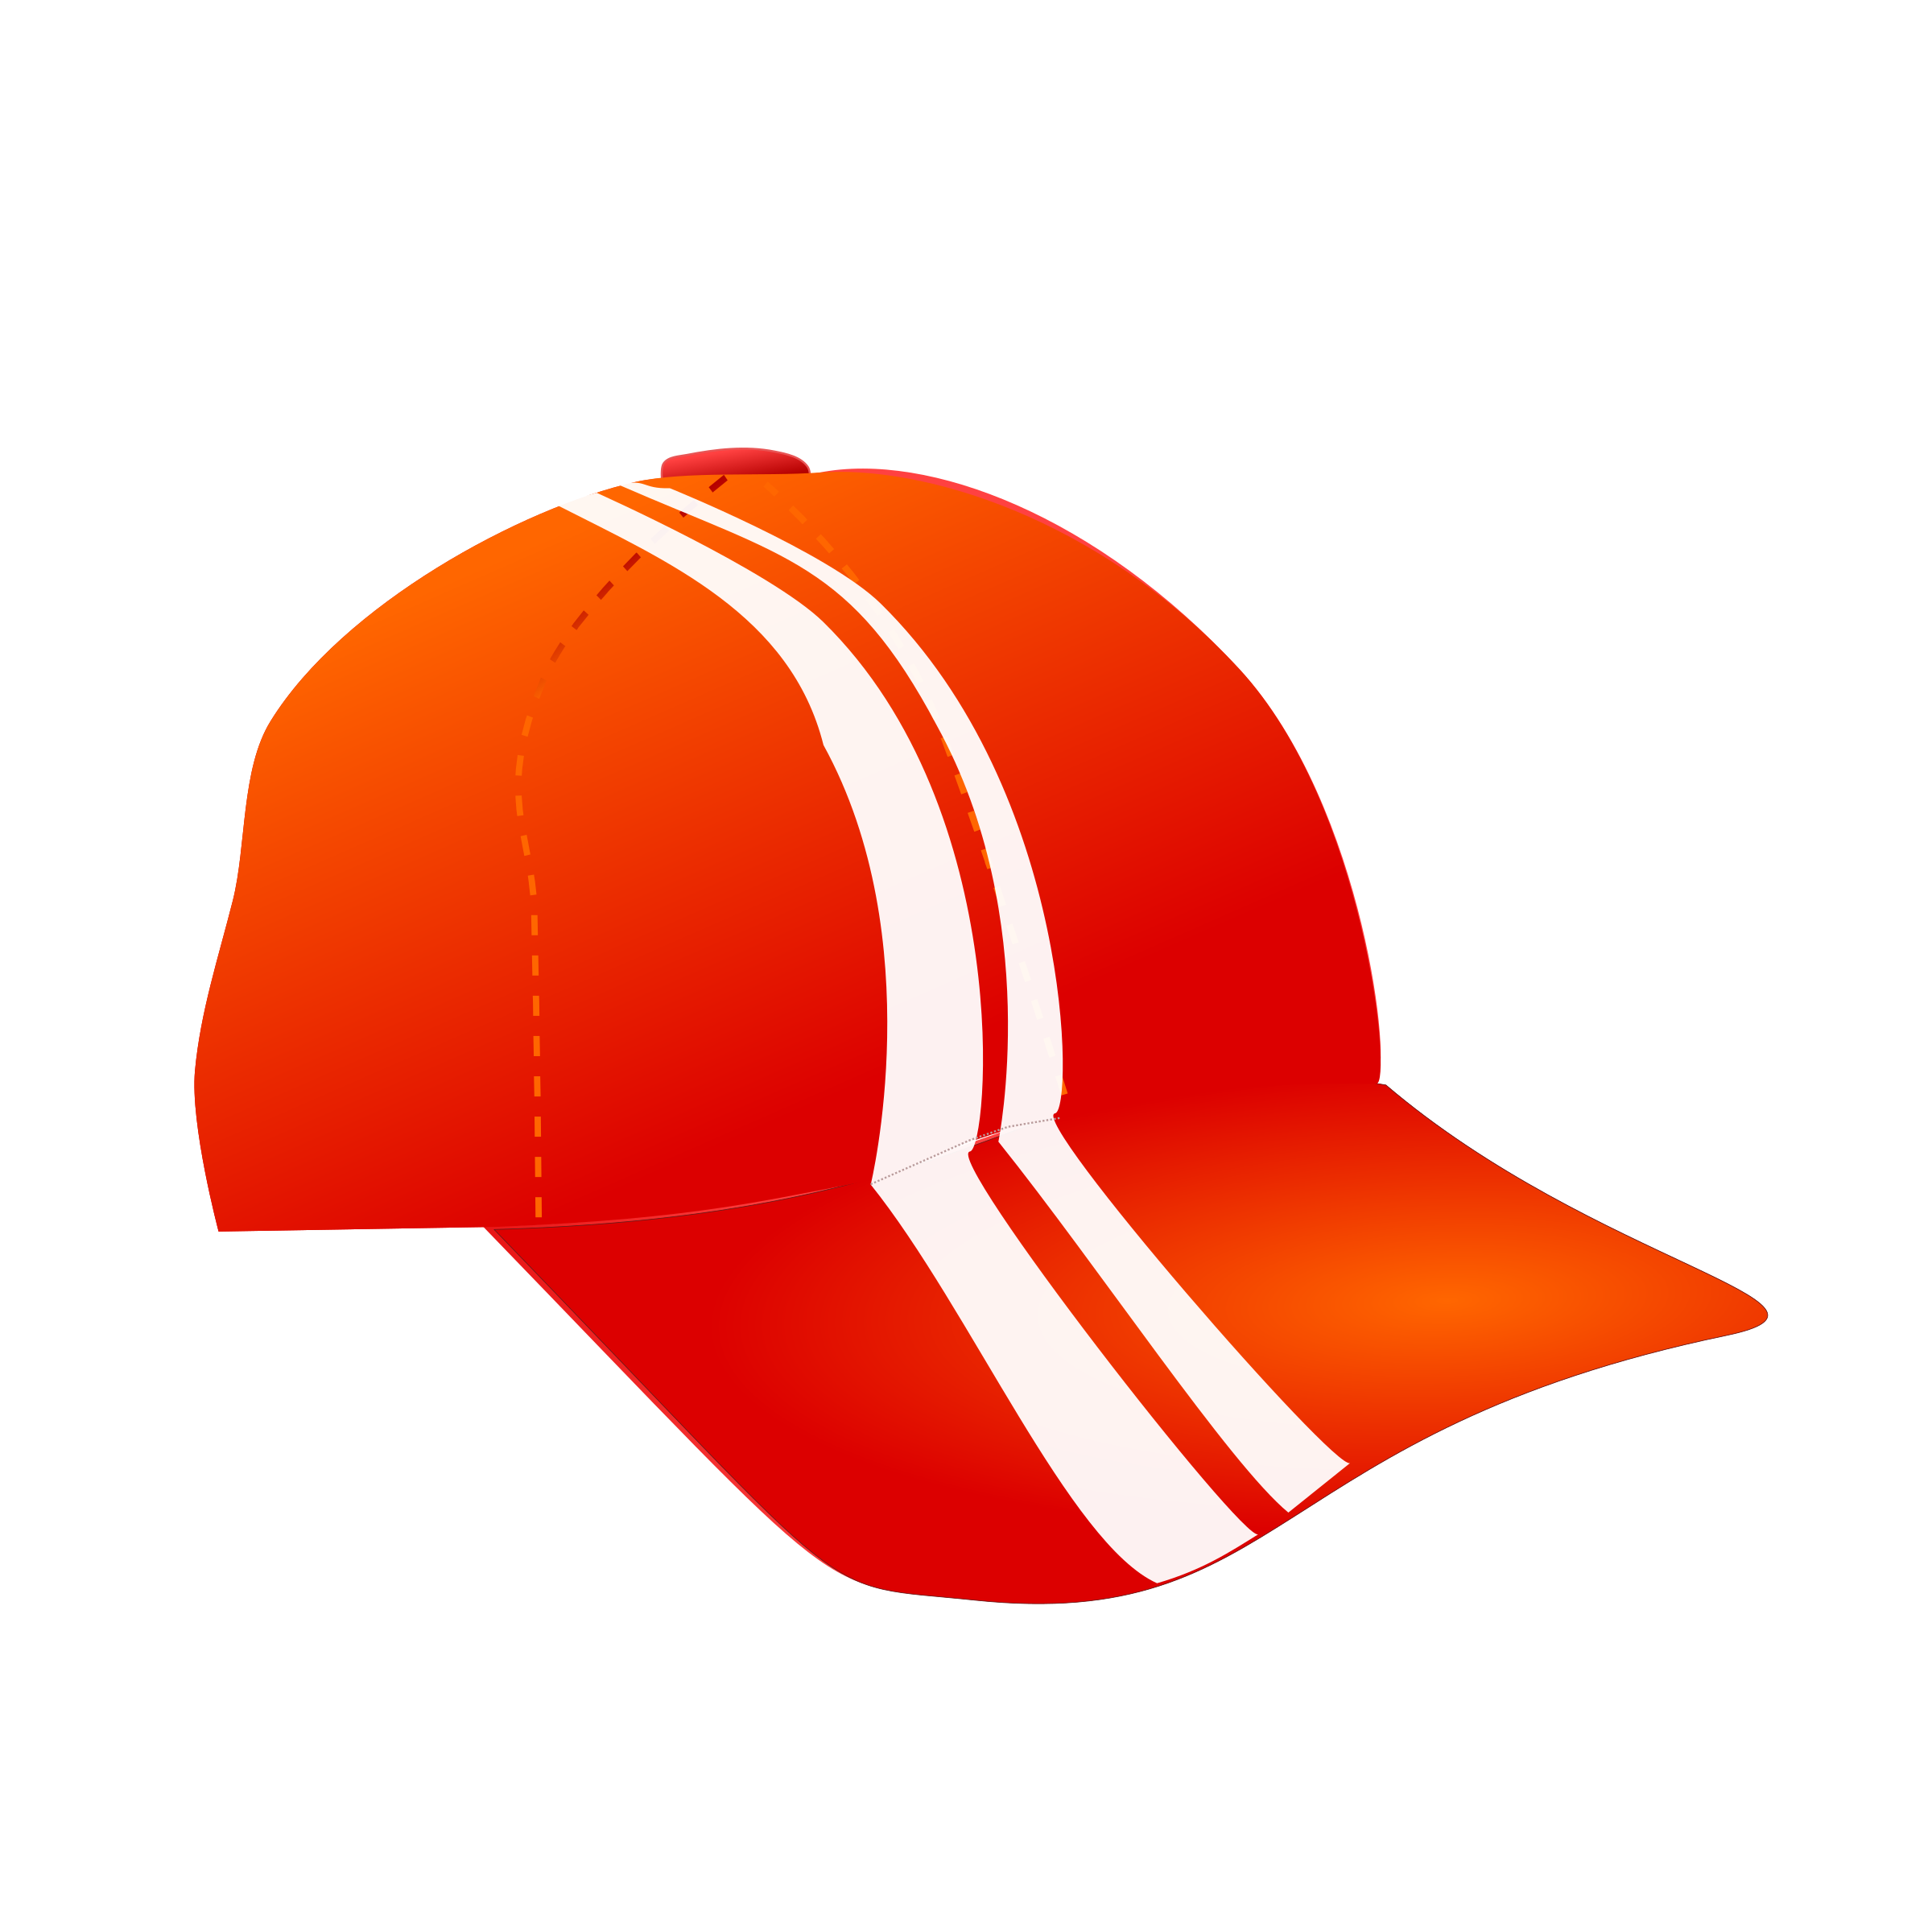 Clipart clothes baseball. Cap with racing stripes